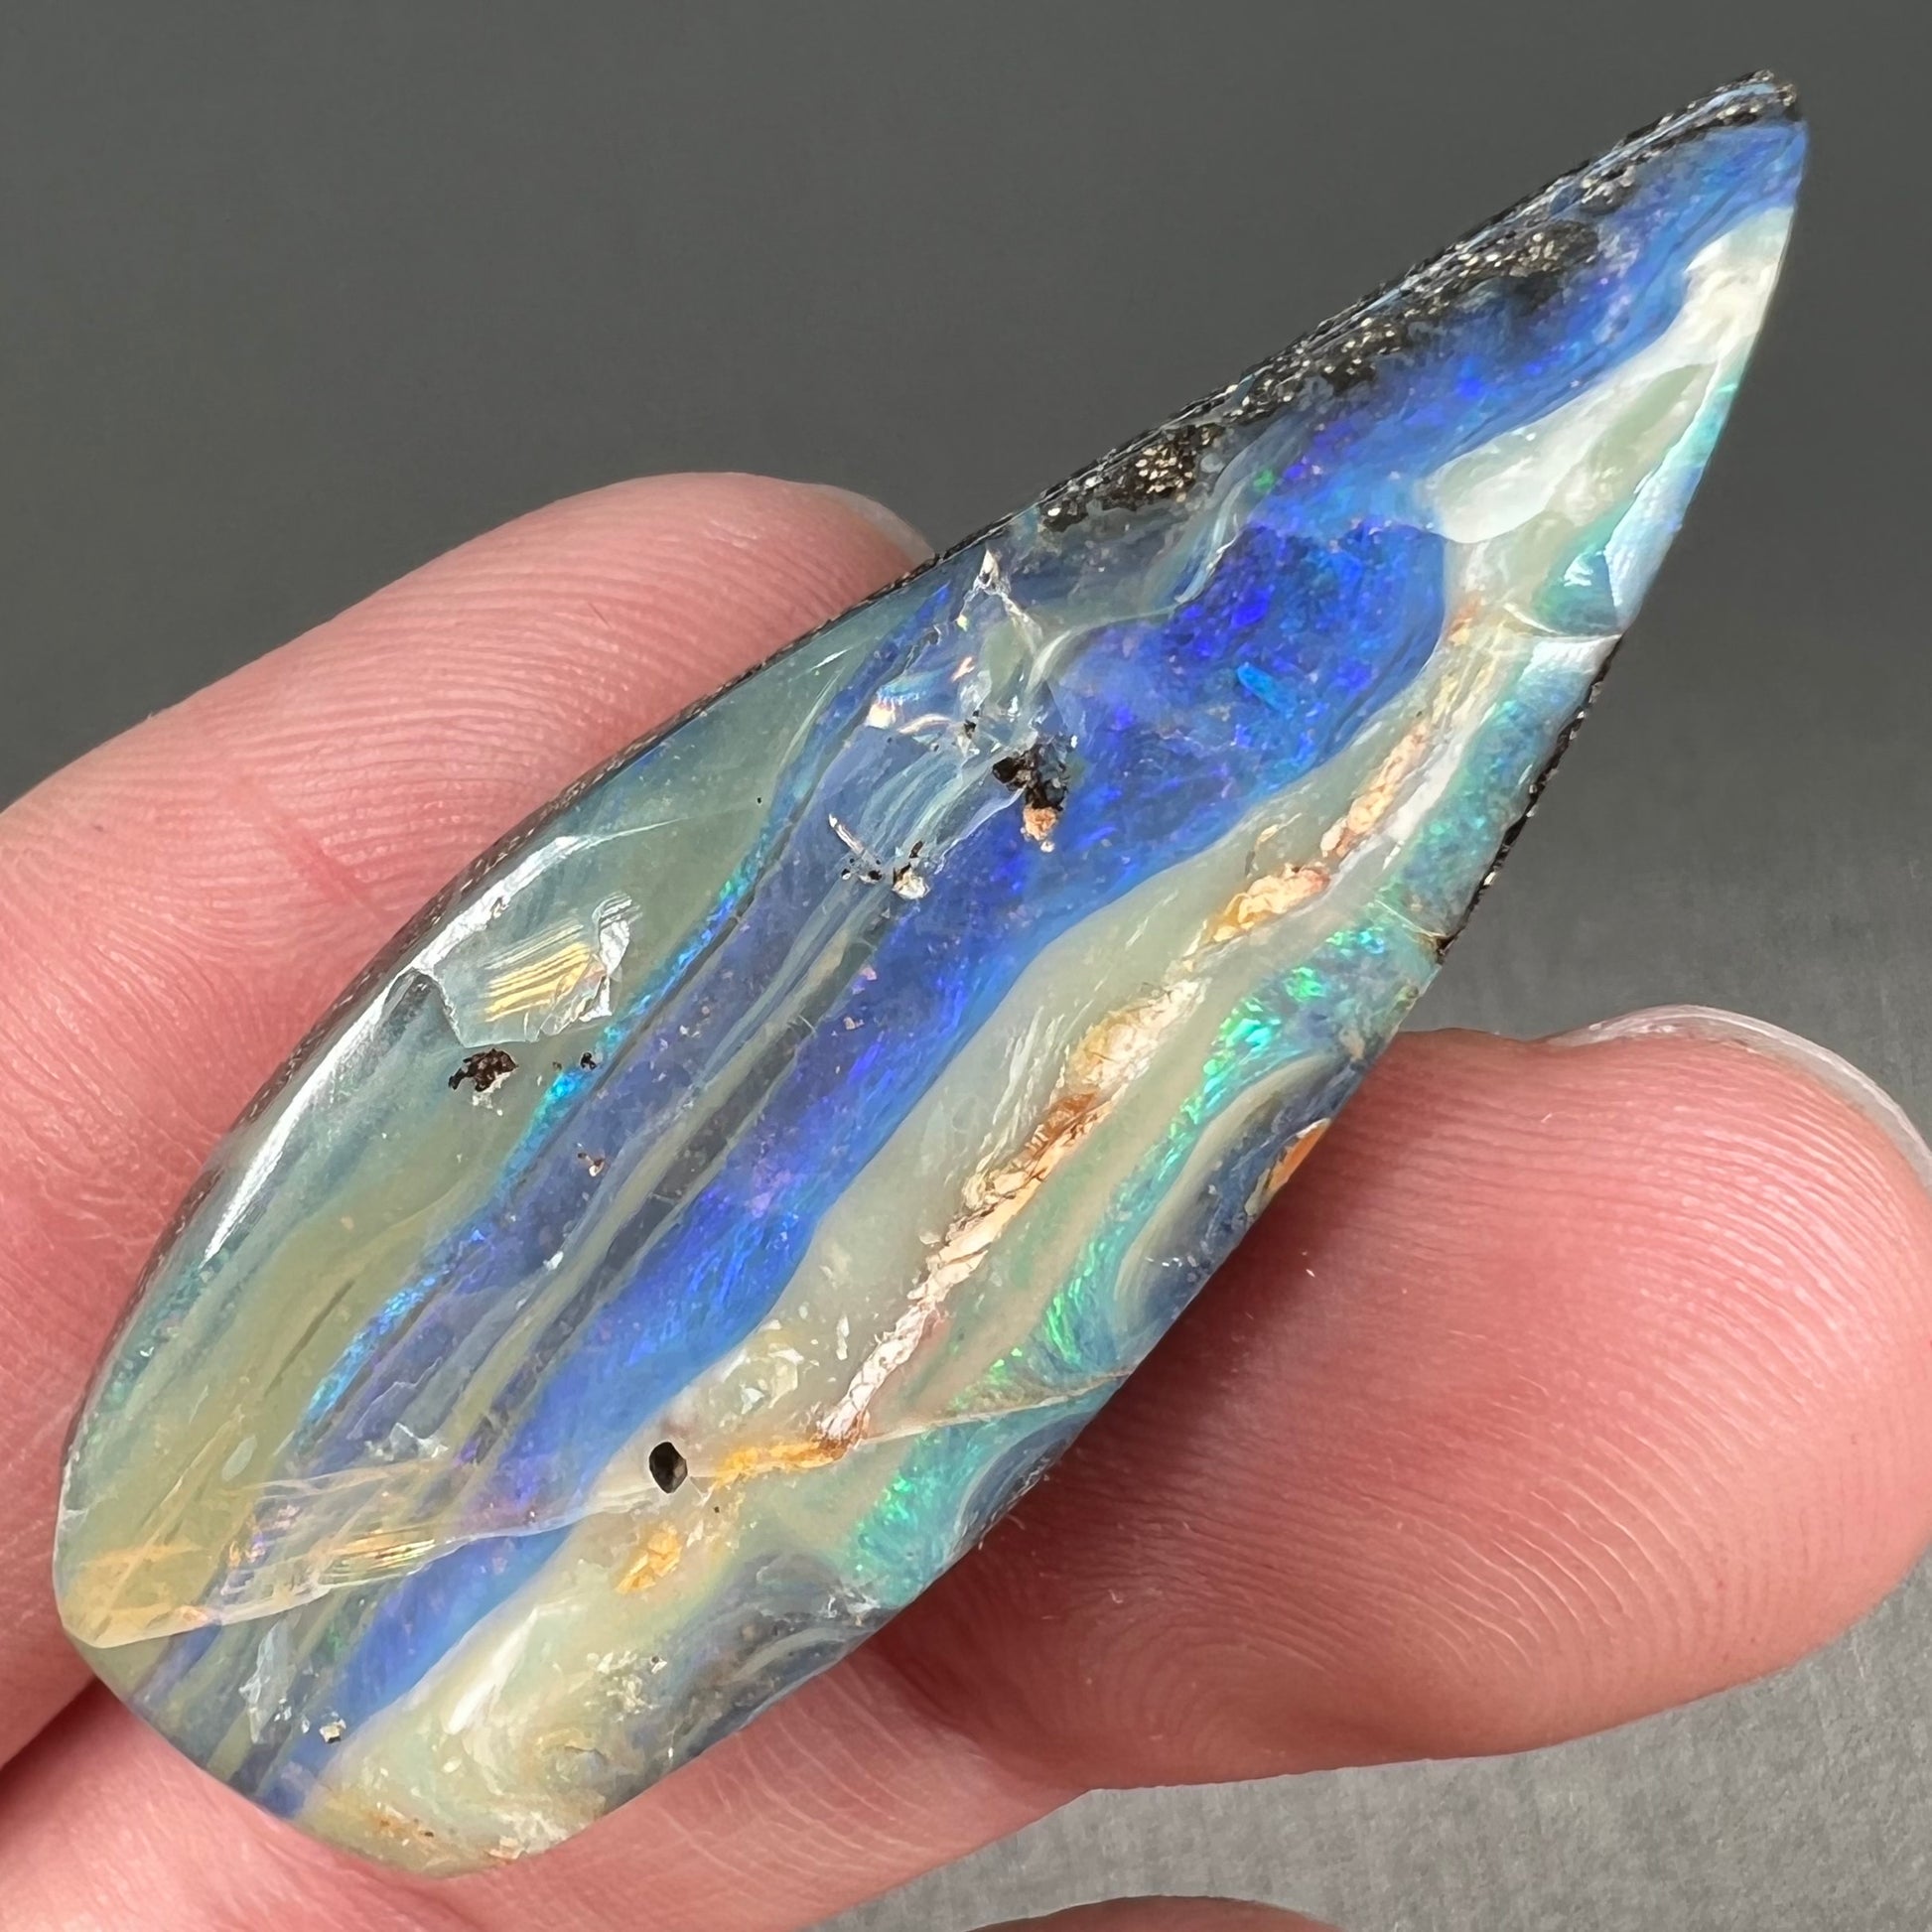 A loose, pear shaped boulder opal stone from Queensland, Australia.